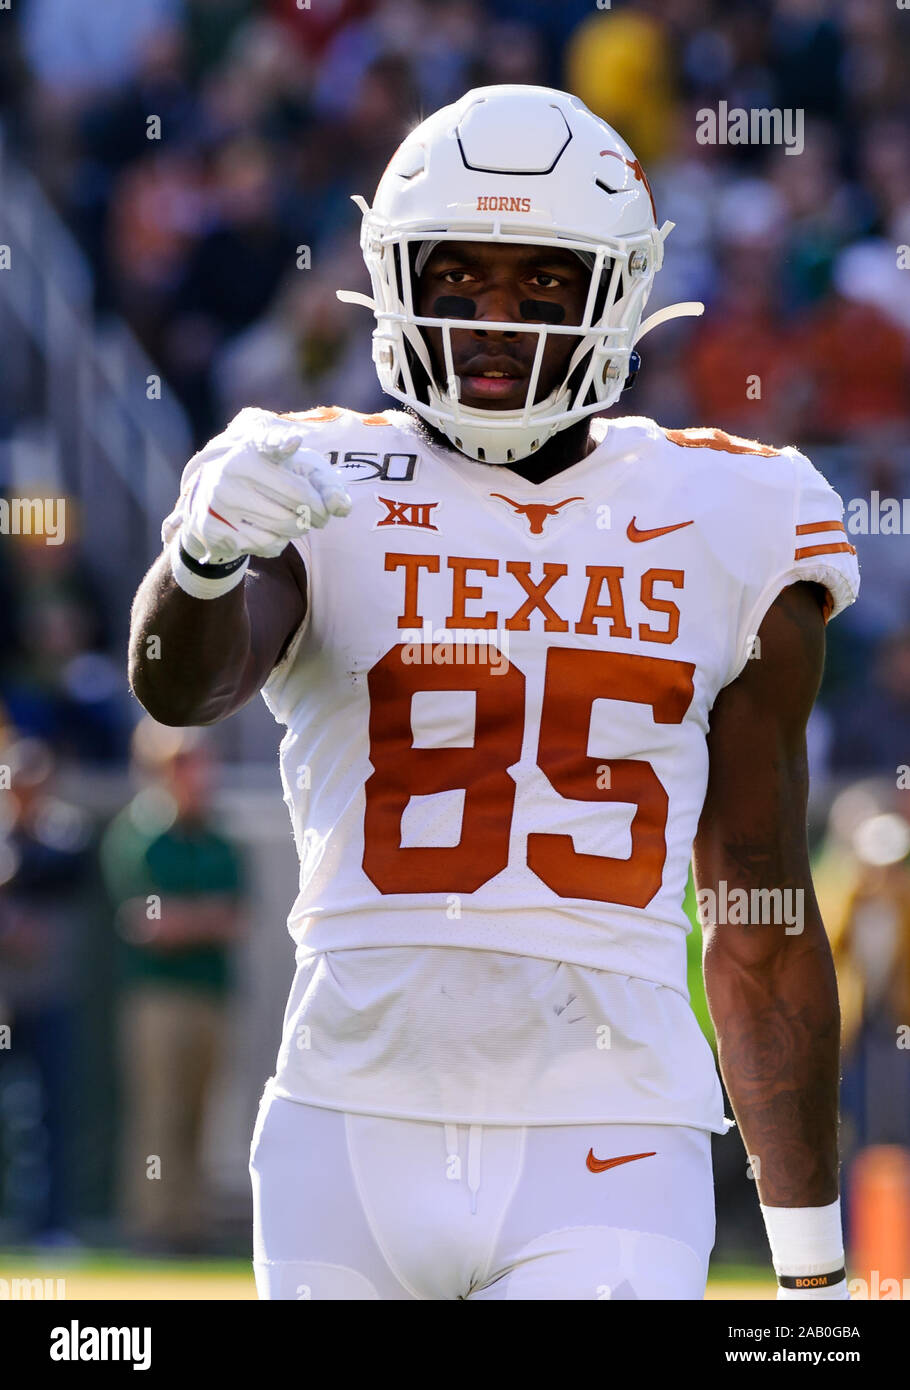 Waco, Texas, USA. 23rd Nov, 2019. Texas Longhorns wide receiver Malcolm Epps (85) looks at the referee to check his spot on the field during the 1st half of the NCAA Football game between Texas Longhorns and the Baylor Bears at McLane Stadium in Waco, Texas. Matthew Lynch/CSM/Alamy Live News Stock Photo